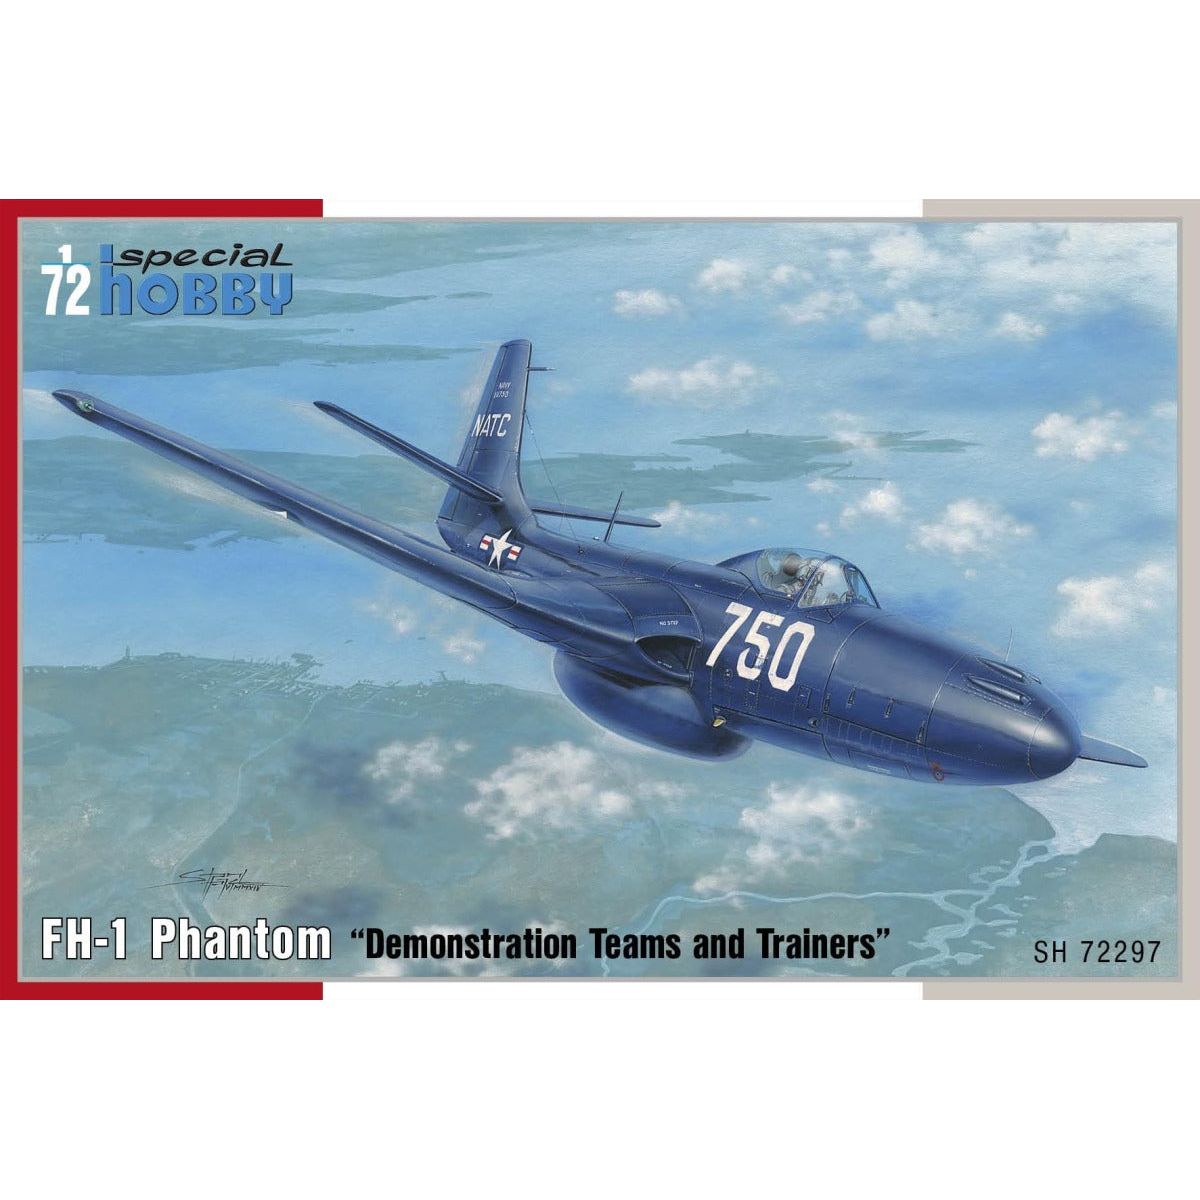 SPECIAL HOBBY 1/72 FH-1 Phantom Demonstration Teams and Trainers